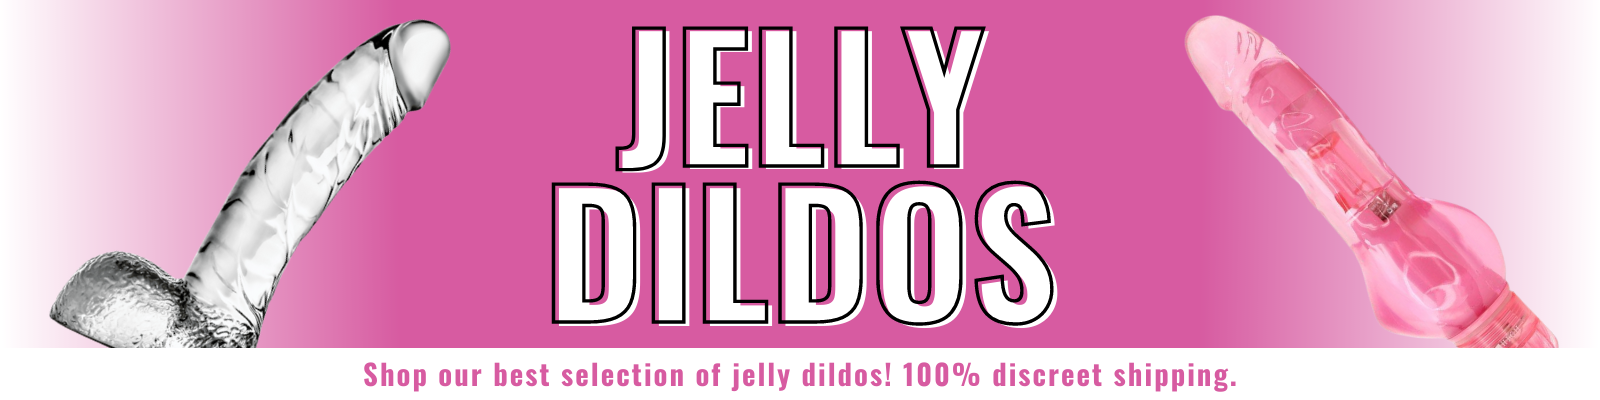 Banner for our our jelly dildos. Banner reads: Jelly Dildos. Shop our best selection of jelly dildos! 100% discreet shipping. 